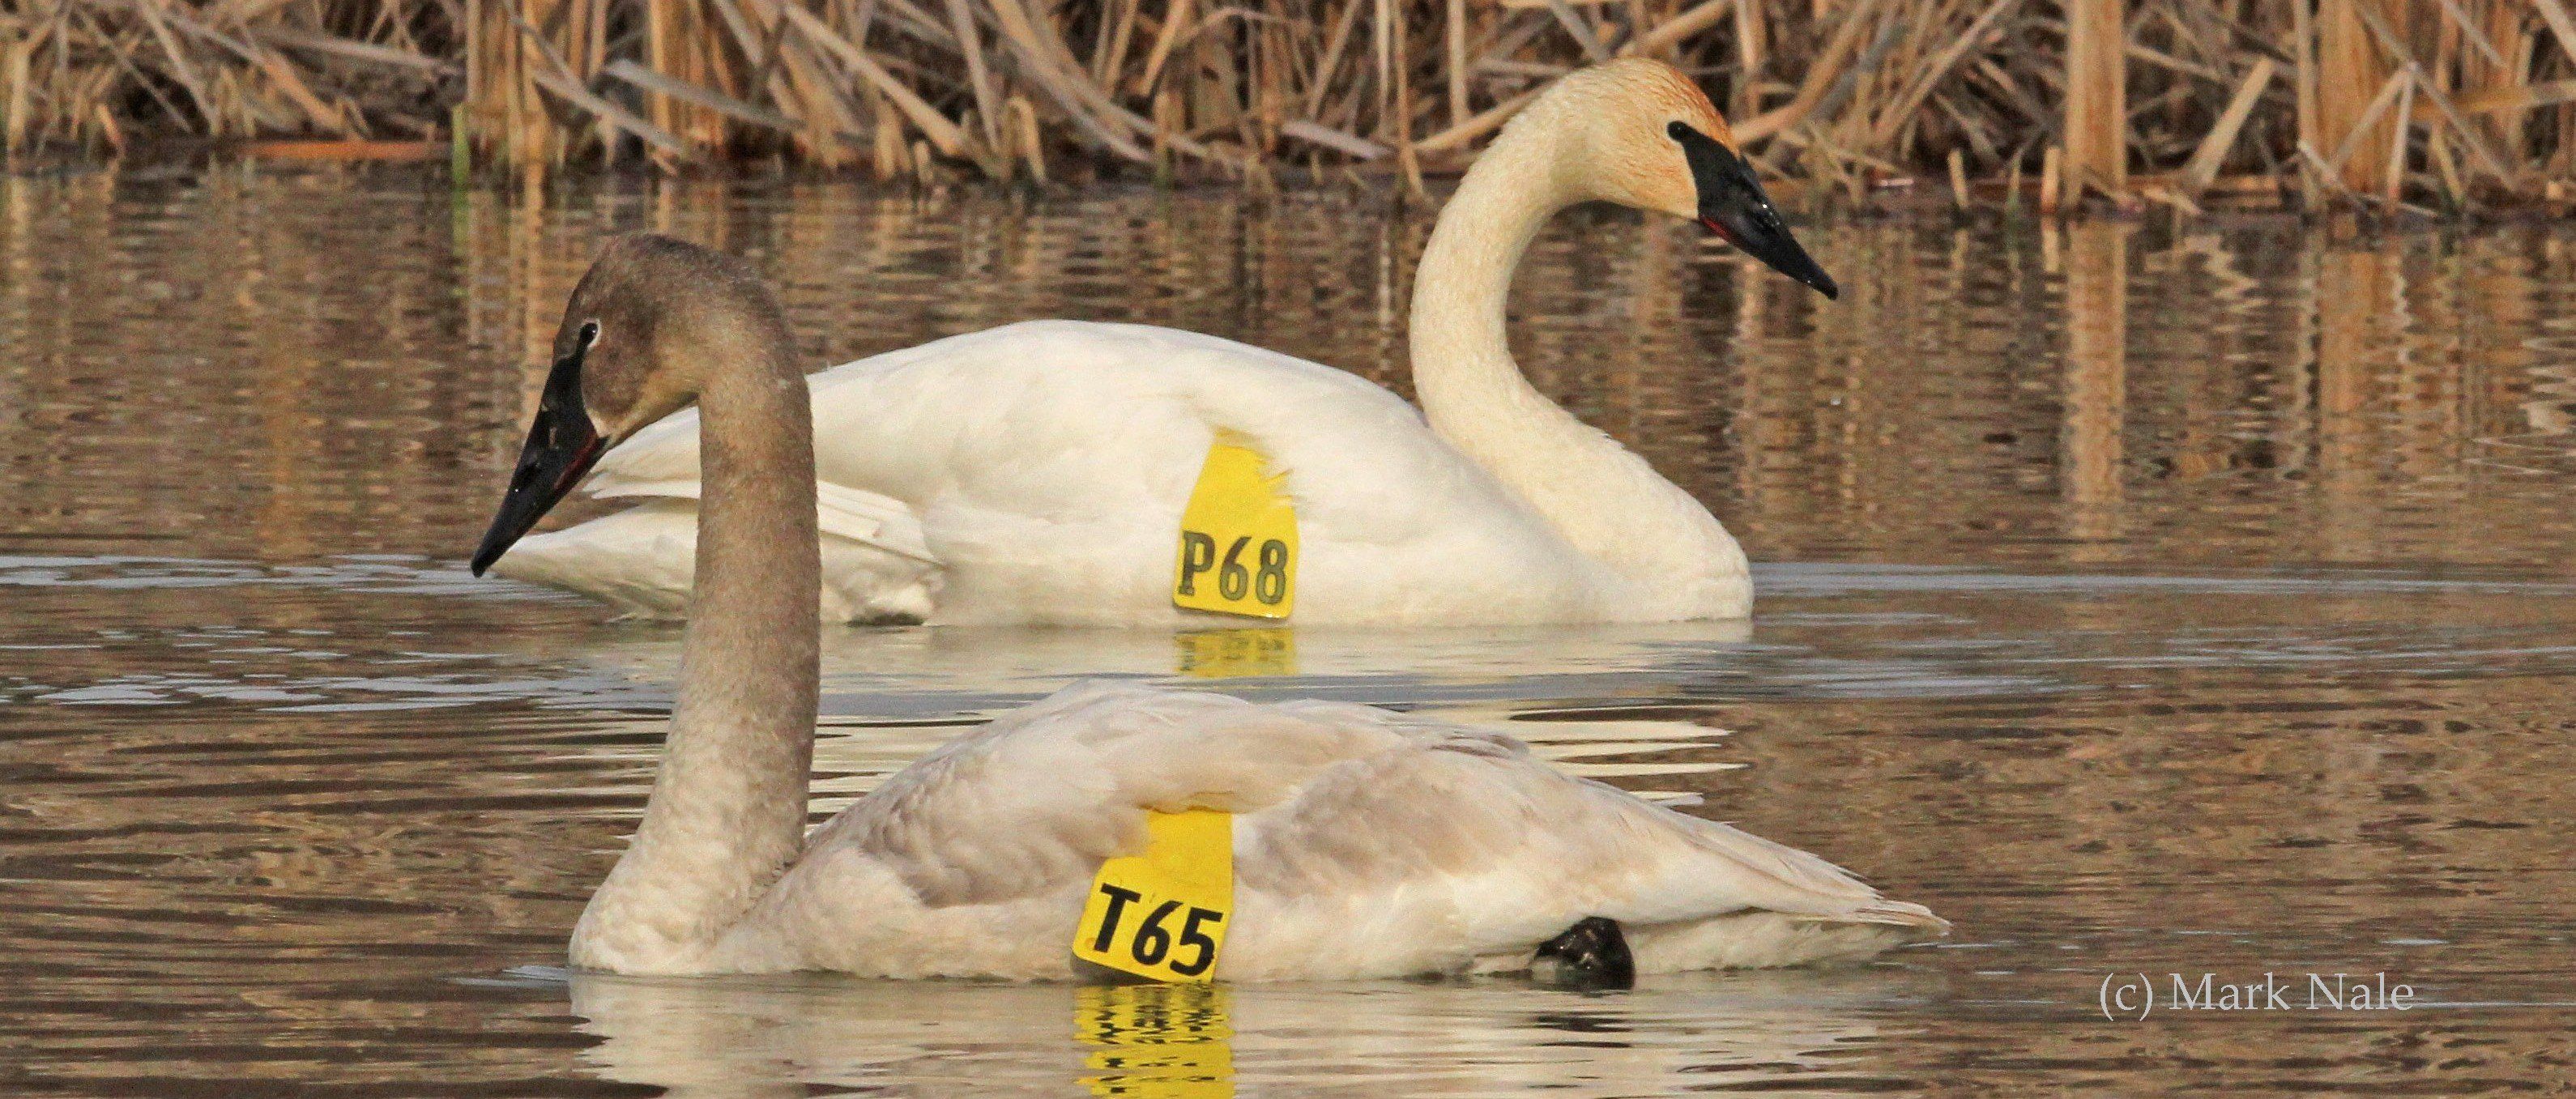 When you report a collared swan to Ebird and The Trumpeter Swan Society, you help track new migration sites and resting areas